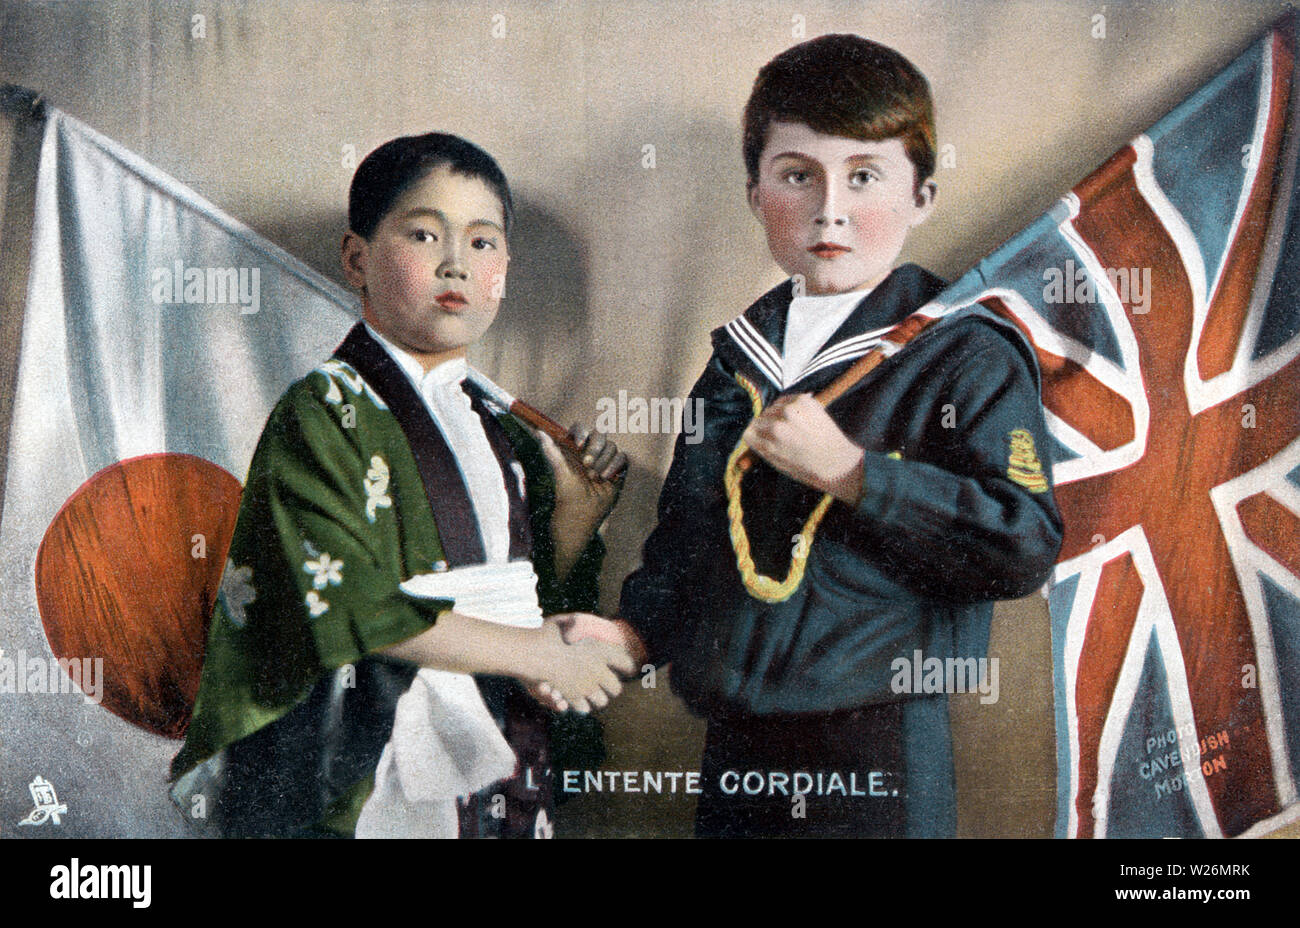 [ 1900s Japan - Anglo-Japanese Alliance ] —   This postcard, ca 1902, of a Japanese boy with the Japanese flag and a western boy with the British flag celebrates the Anglo-Japanese Alliance. The alliance was first signed on January 30, 1902 (Meiji 35) and extended in 1905 (Meiji 38)  and 1911 (Meiji 44) before expiring in 1921 (Taisho 10).  20th century vintage postcard. Stock Photo